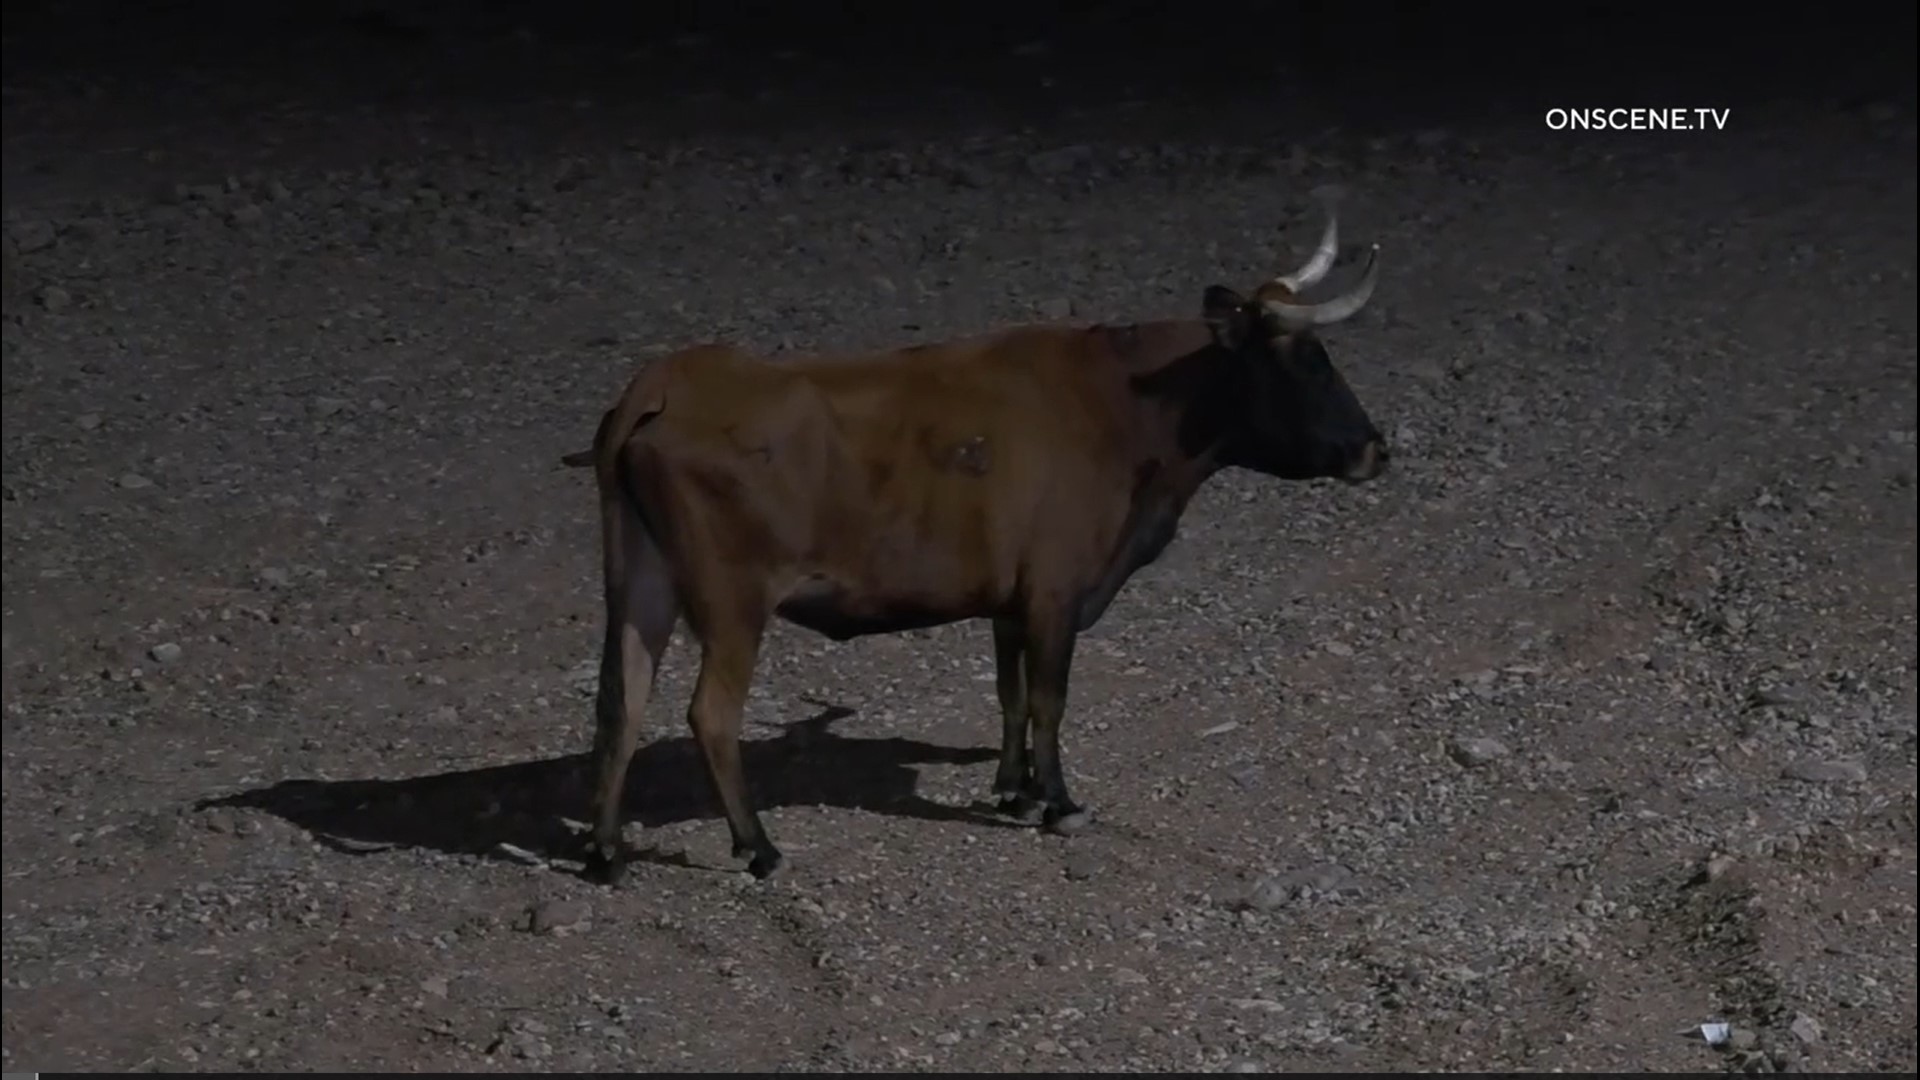 The escaped steer was first spotted in the HOV lane of I-17 between Happy Valley and Jomax roads, authorities say.